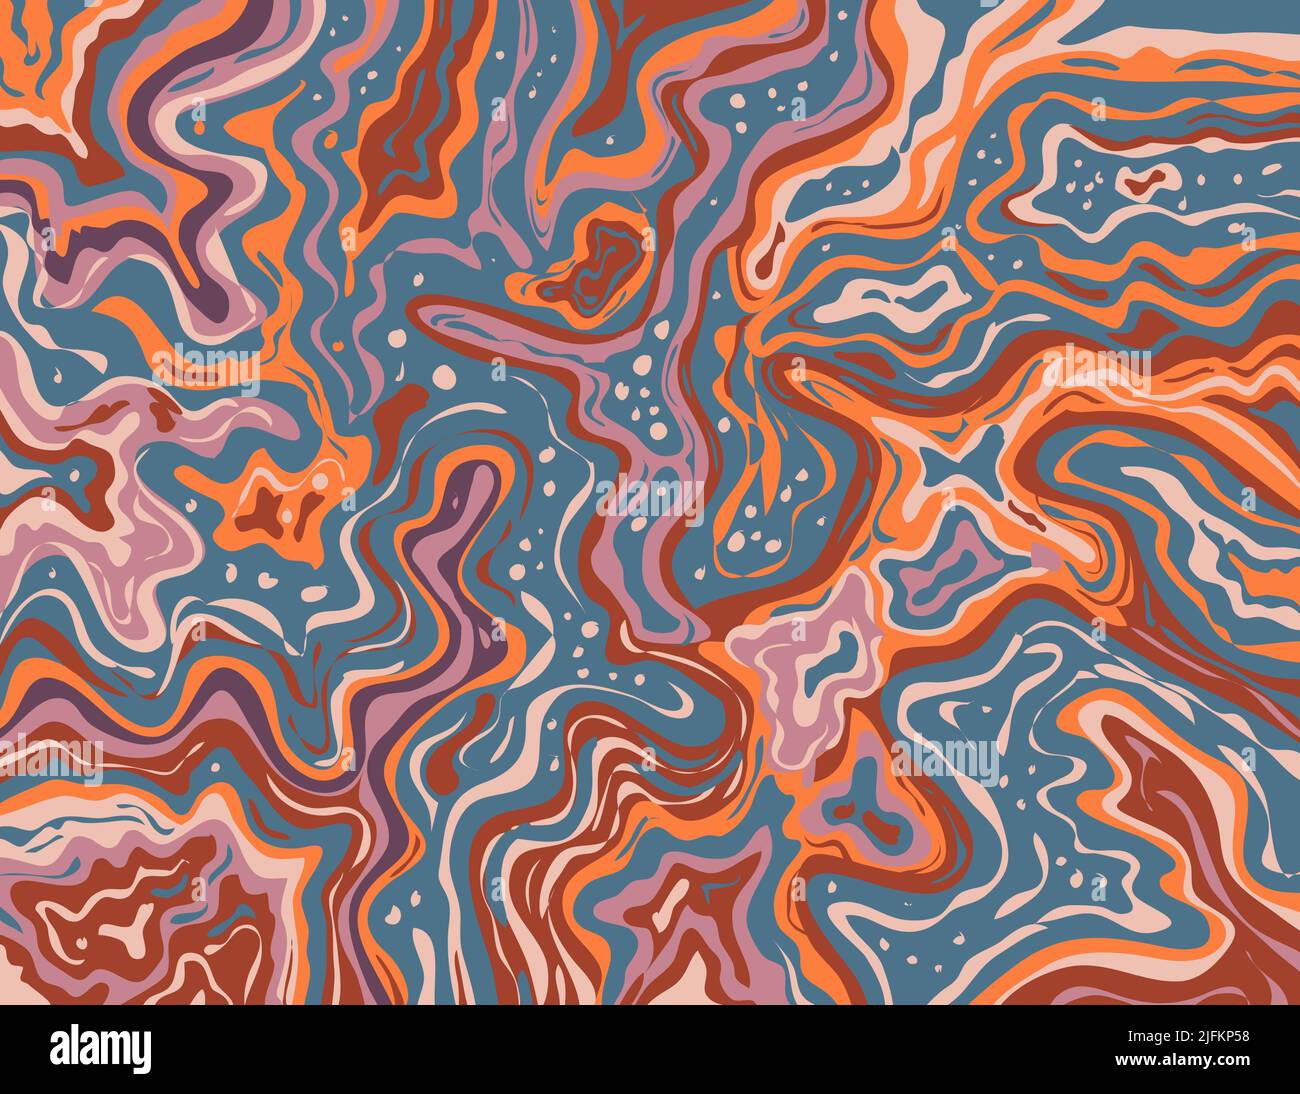 Digital marbling or inkscape illustration of an abstract swirling,psychedelic, liquid marble and simulated marbling in the style of Suminagashi Stock Photo